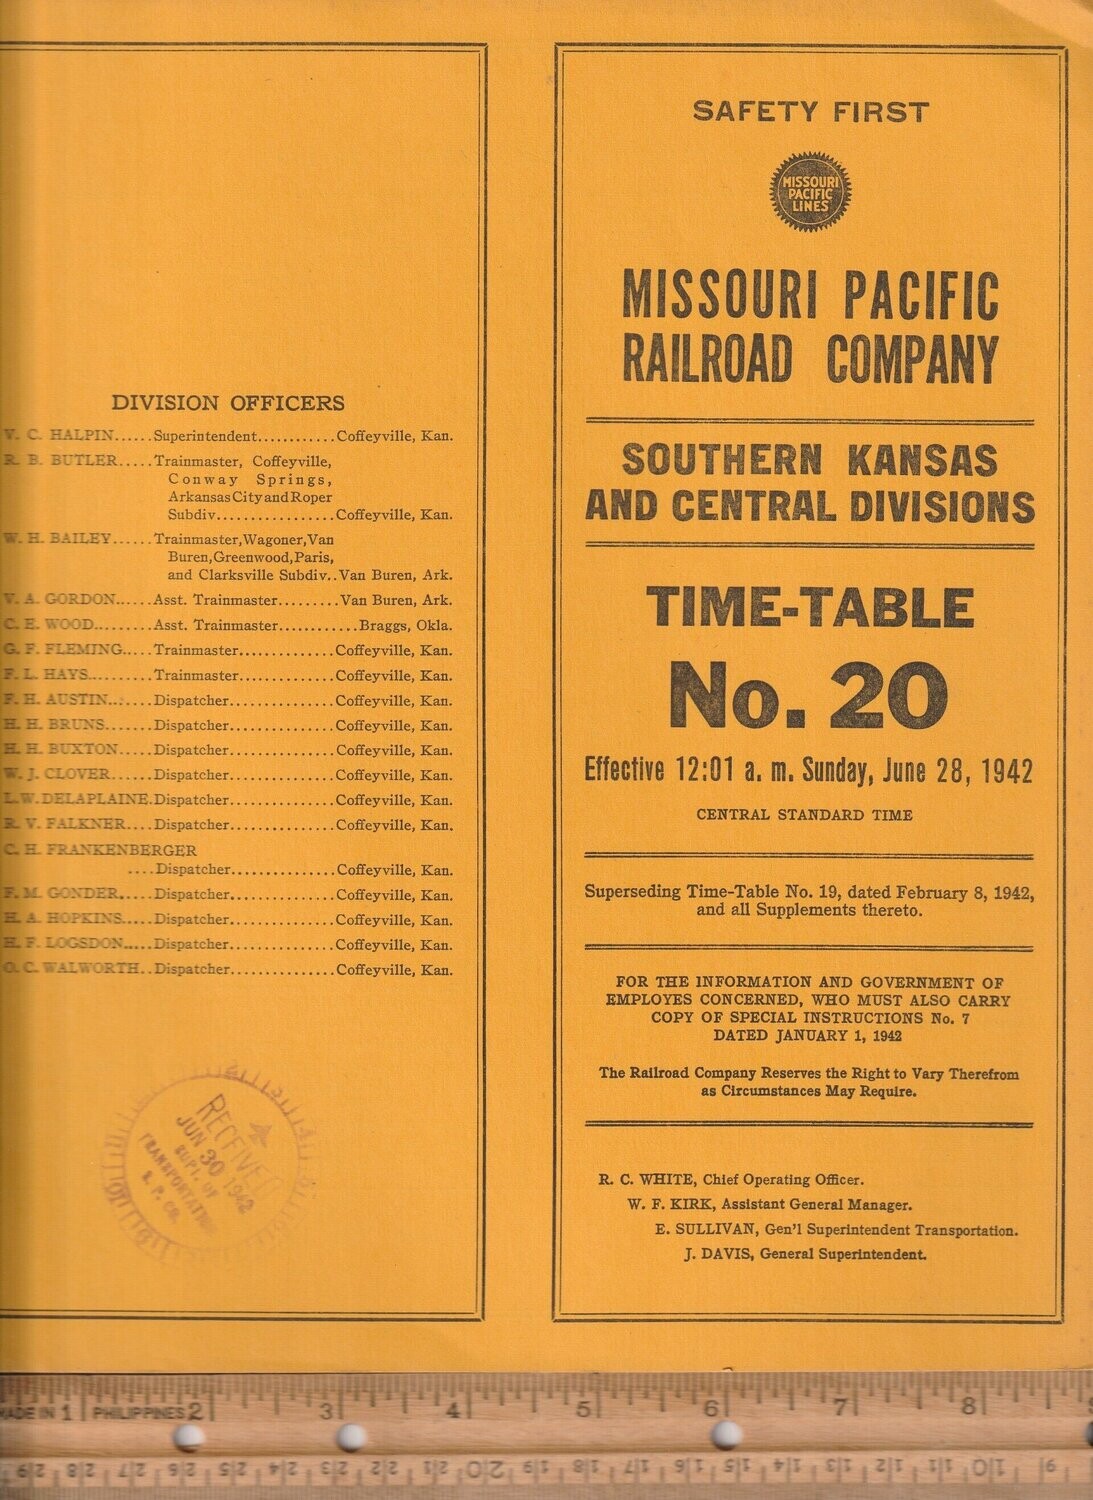 MIssouri Pacific Southern Kansas and Central Divisions 1942